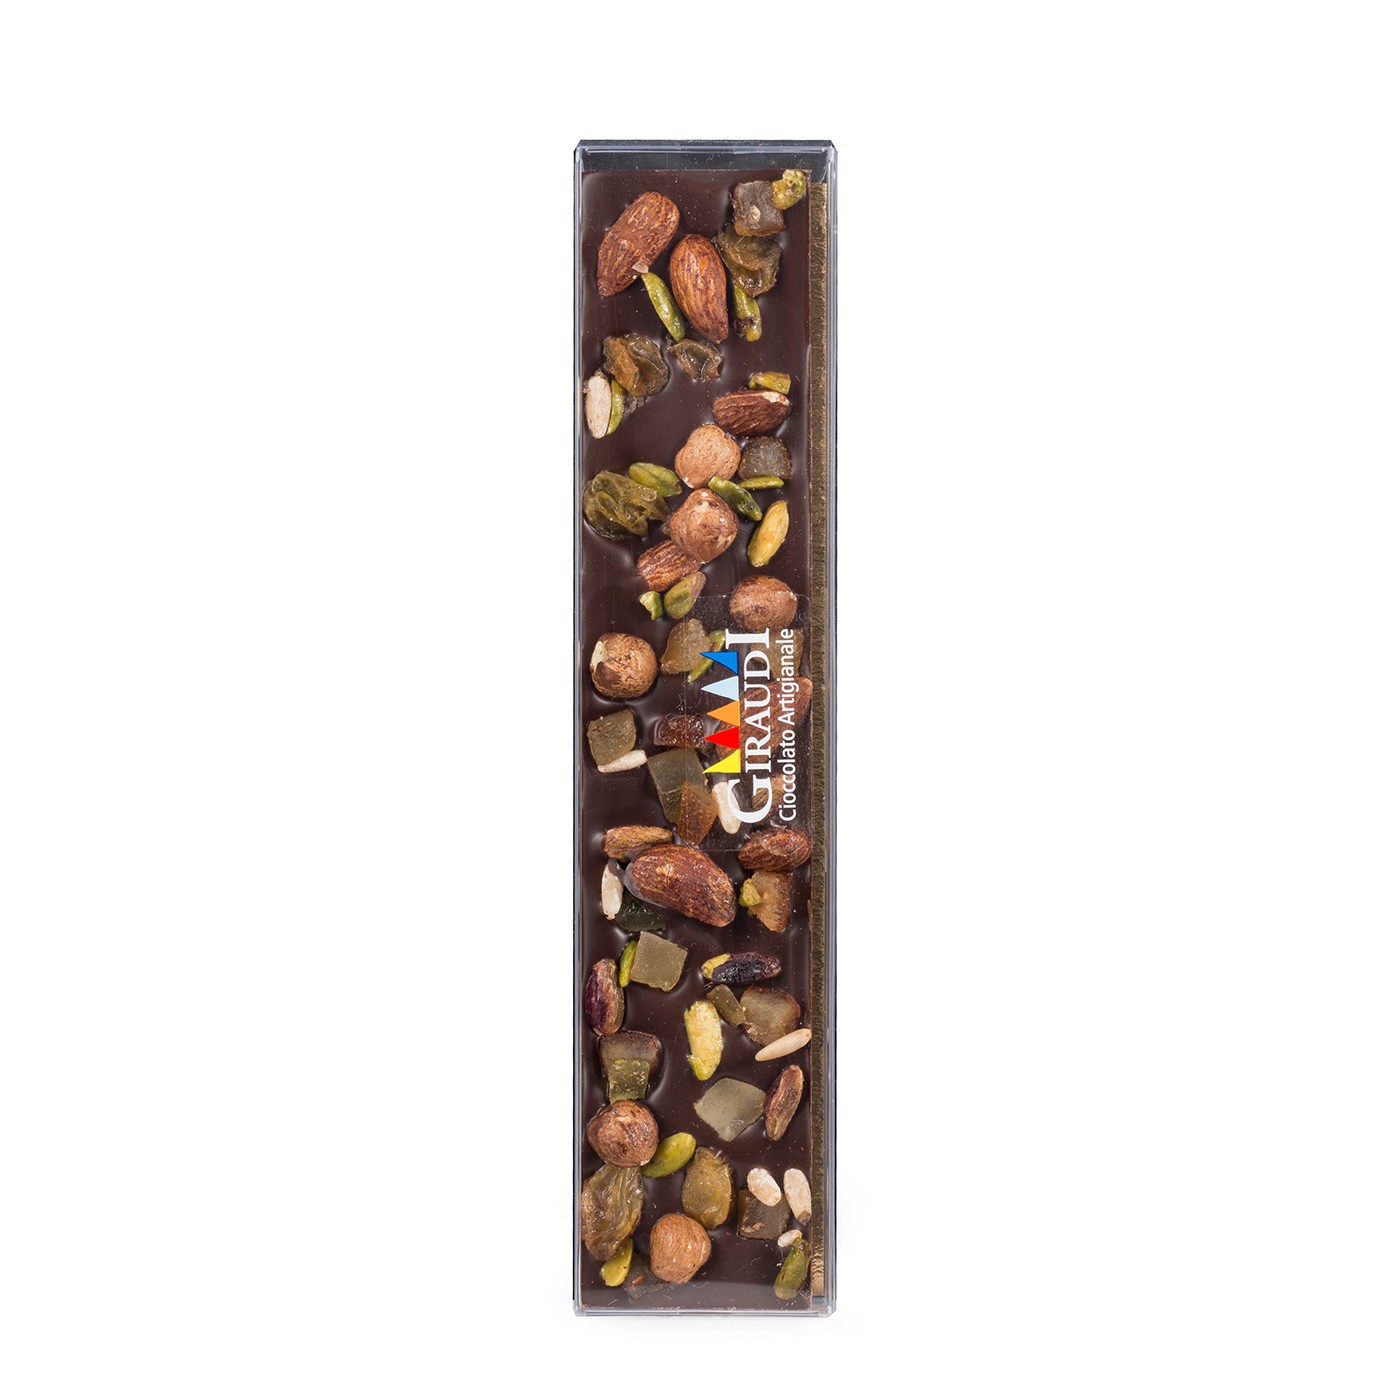 Dark Chocolate Bar with Nuts and Candied Fruit 4.23 oz